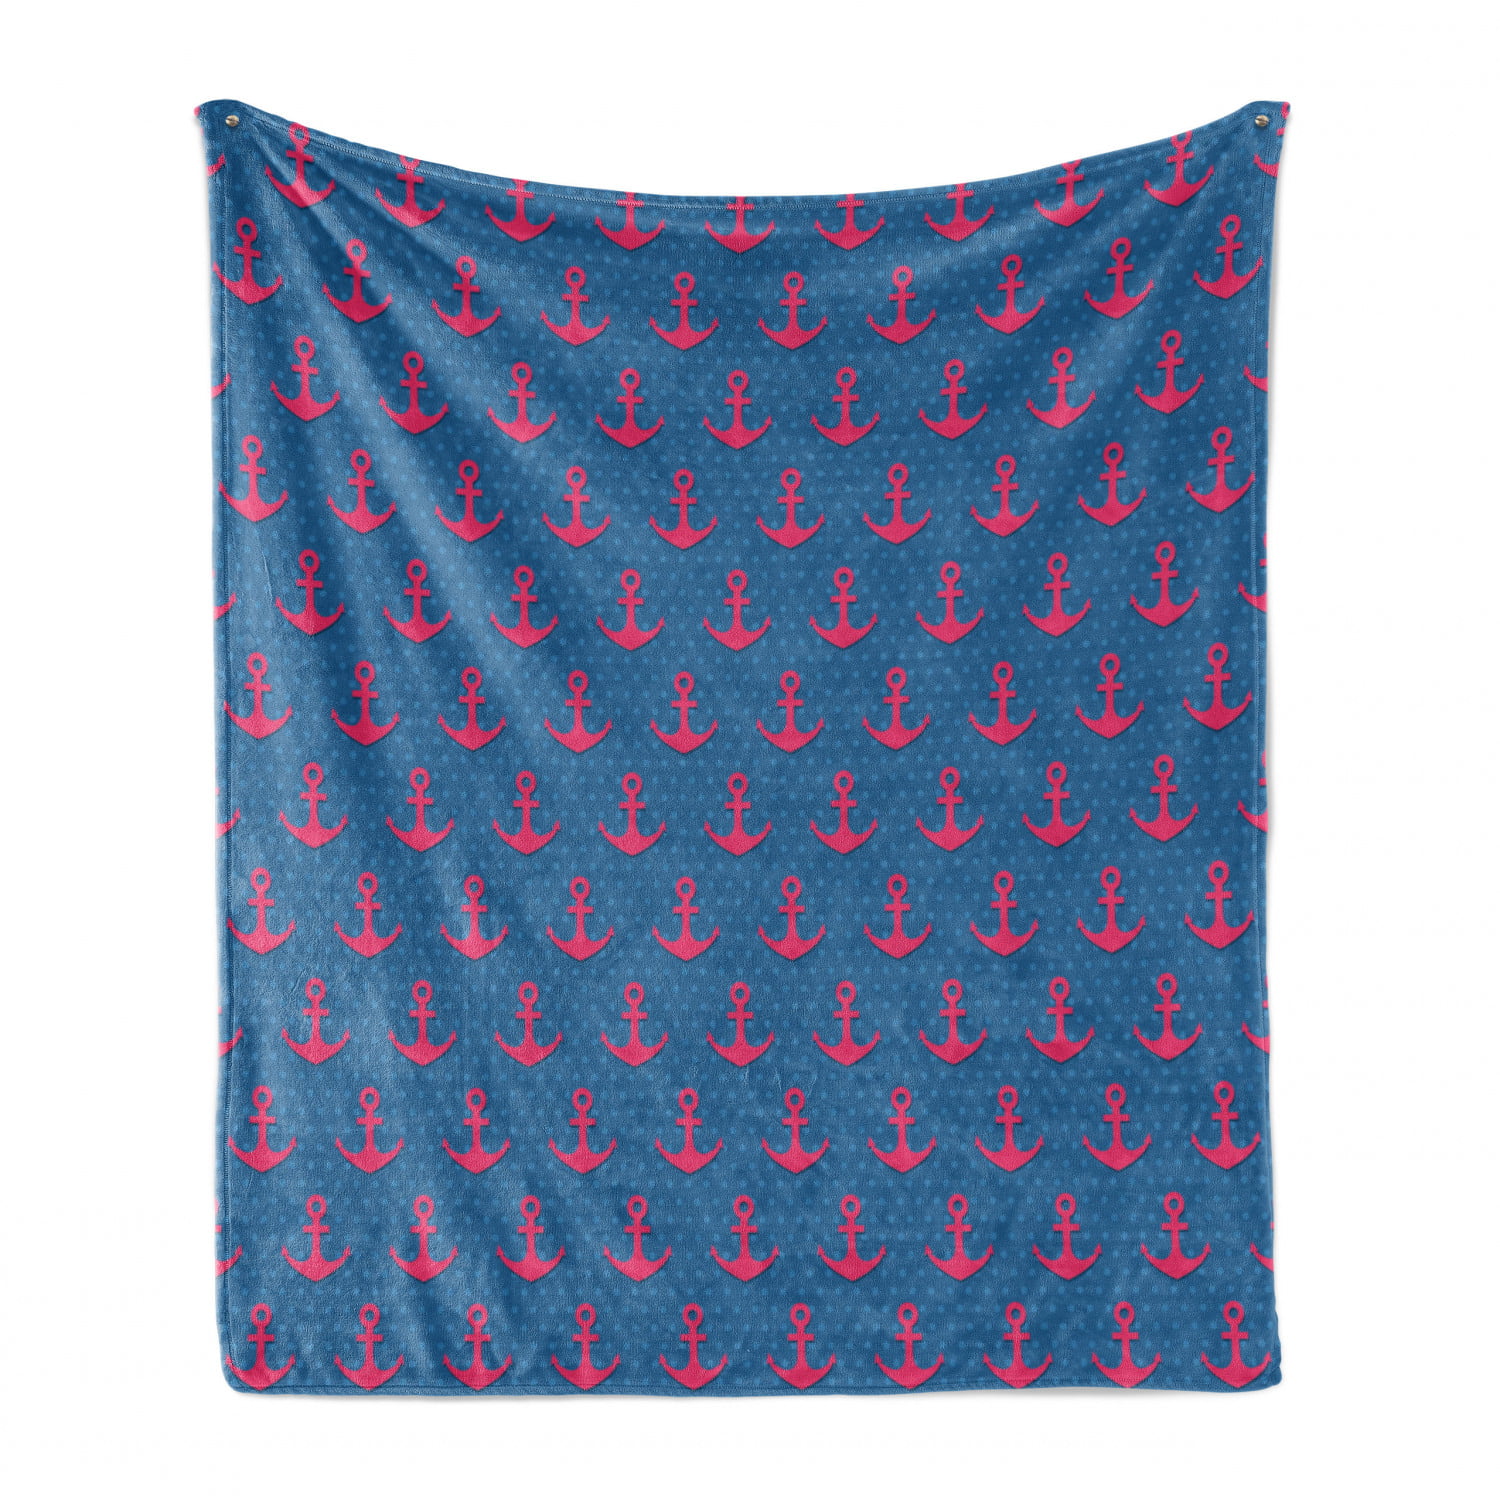 Cozy Plush for Indoor and Outdoor Use Magenta Violet Blue 70 x 90 Pink on Blue Polka Dotted Background Retro Nautical Pattern Print Ambesonne Anchor Soft Flannel Fleece Throw Blanket 